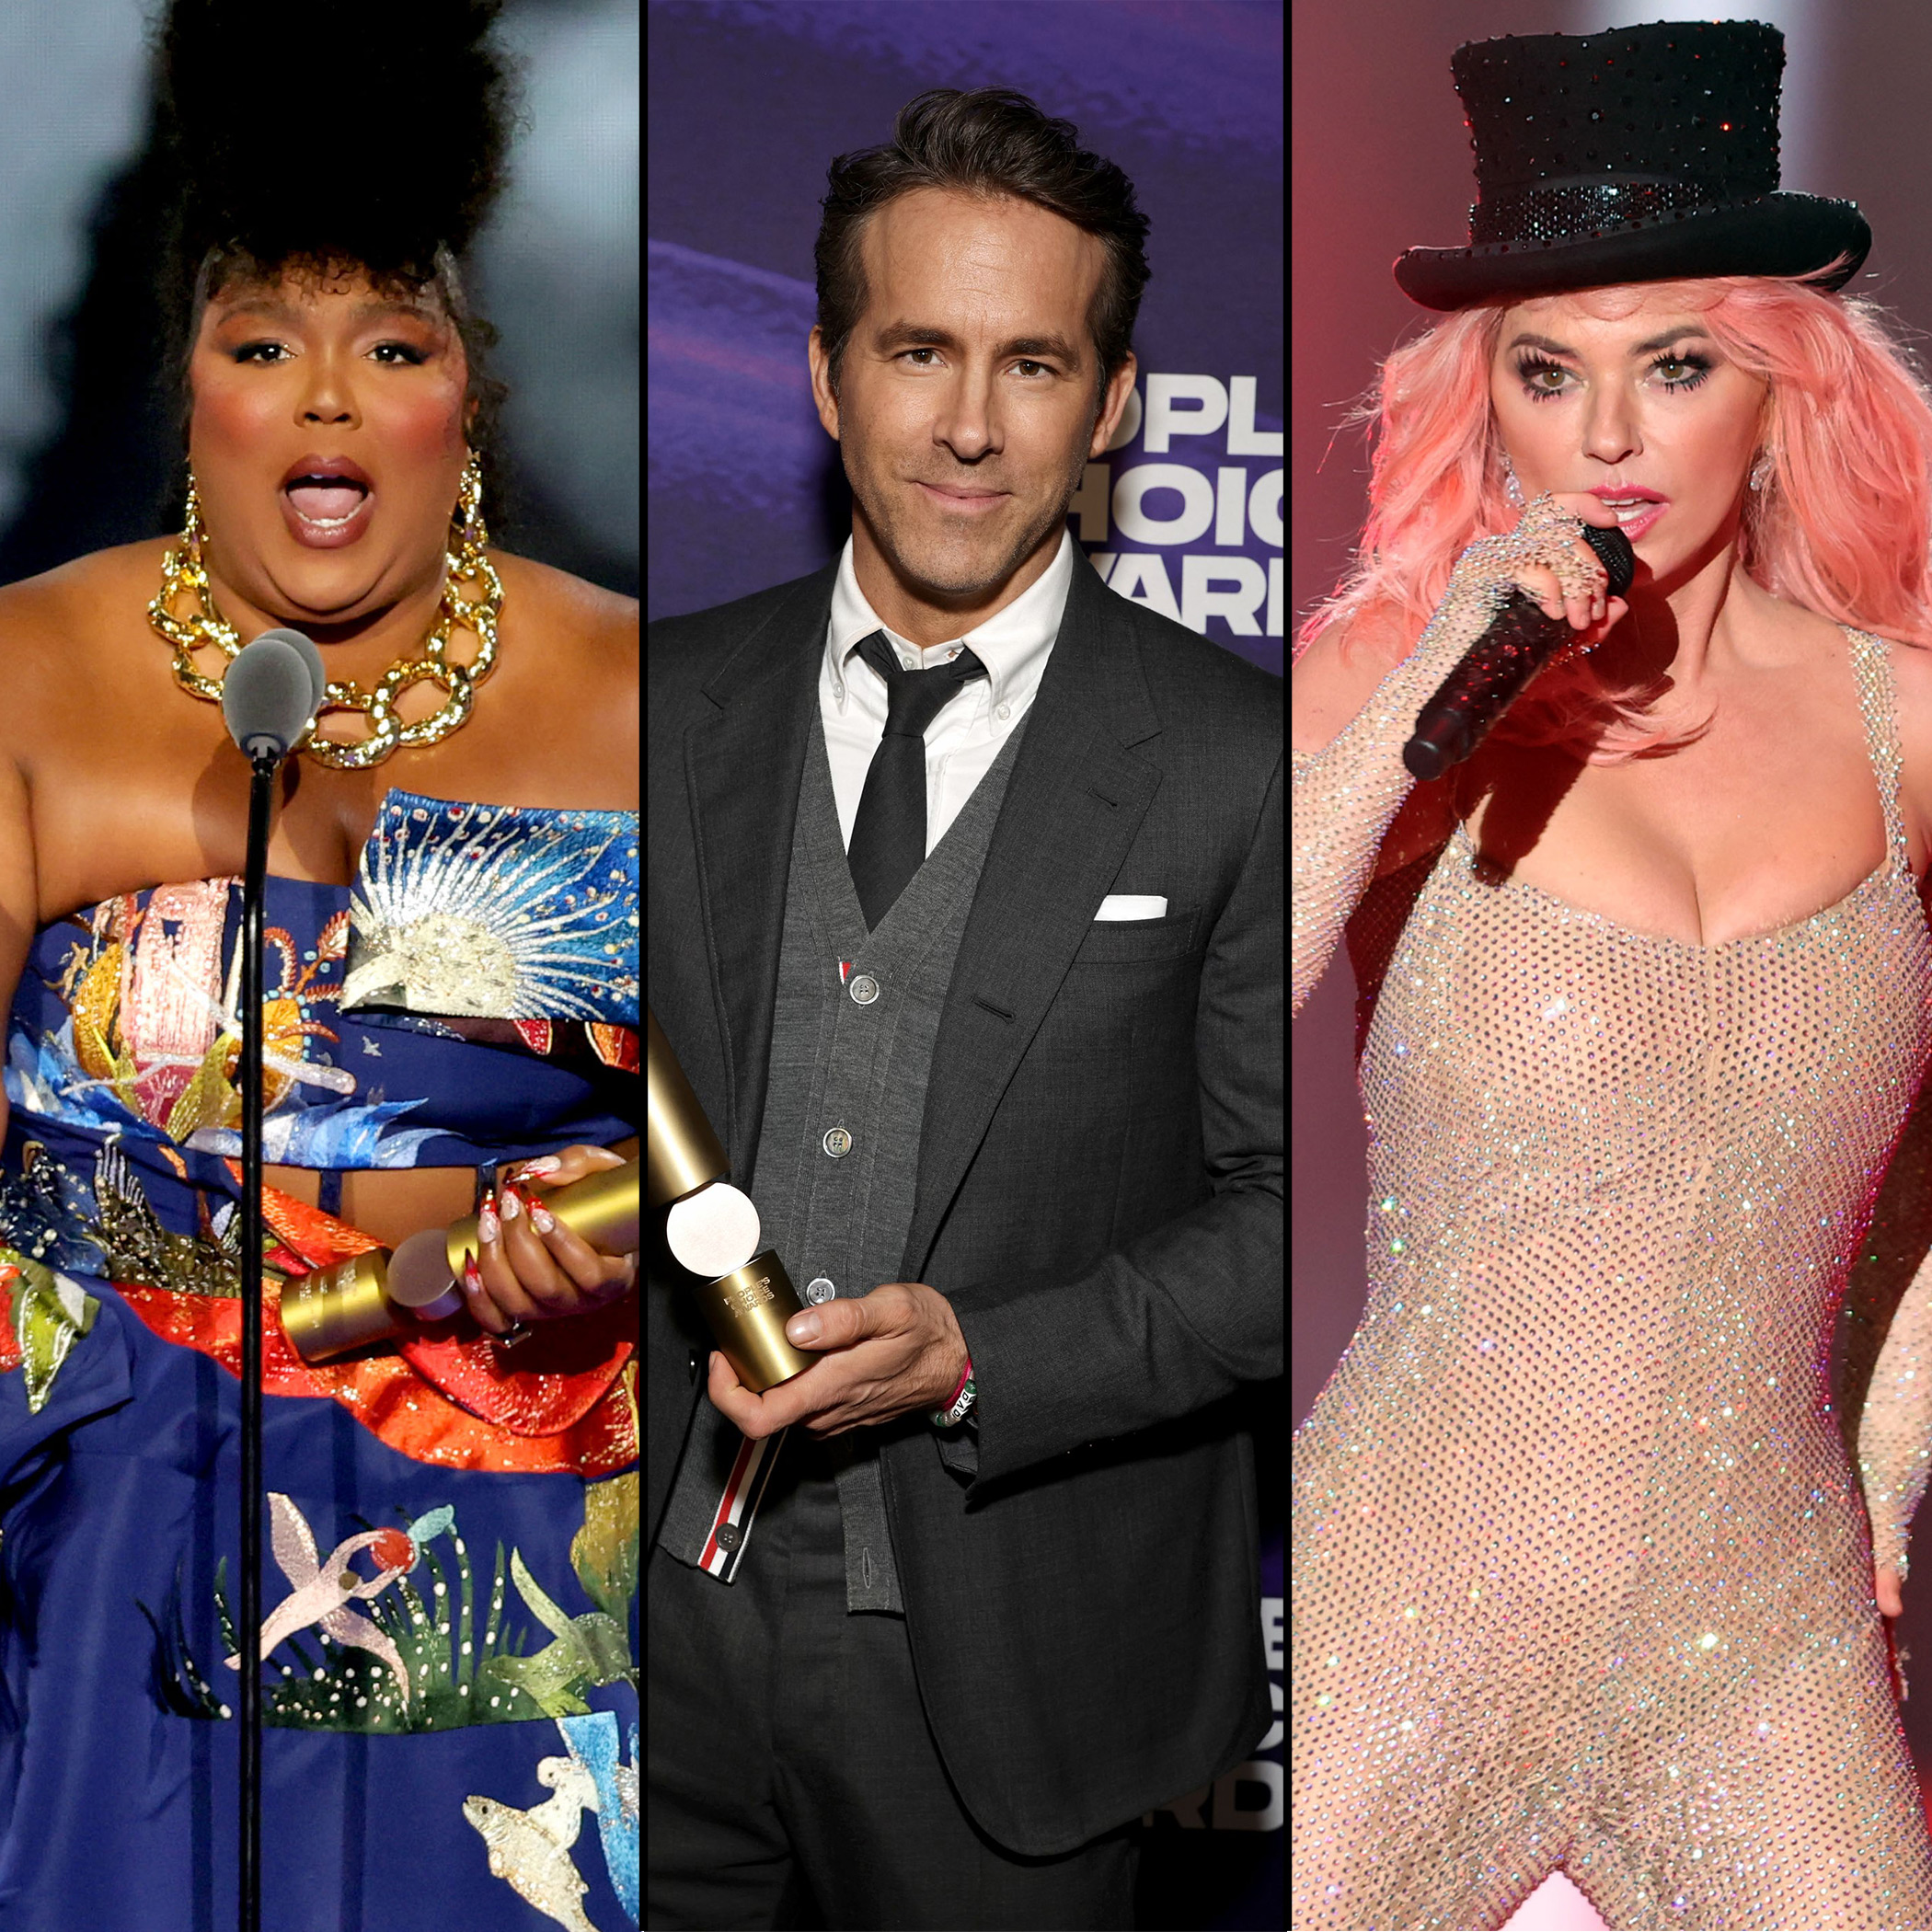 People's Choice Awards 2022 Complete List of Winners and Nominees